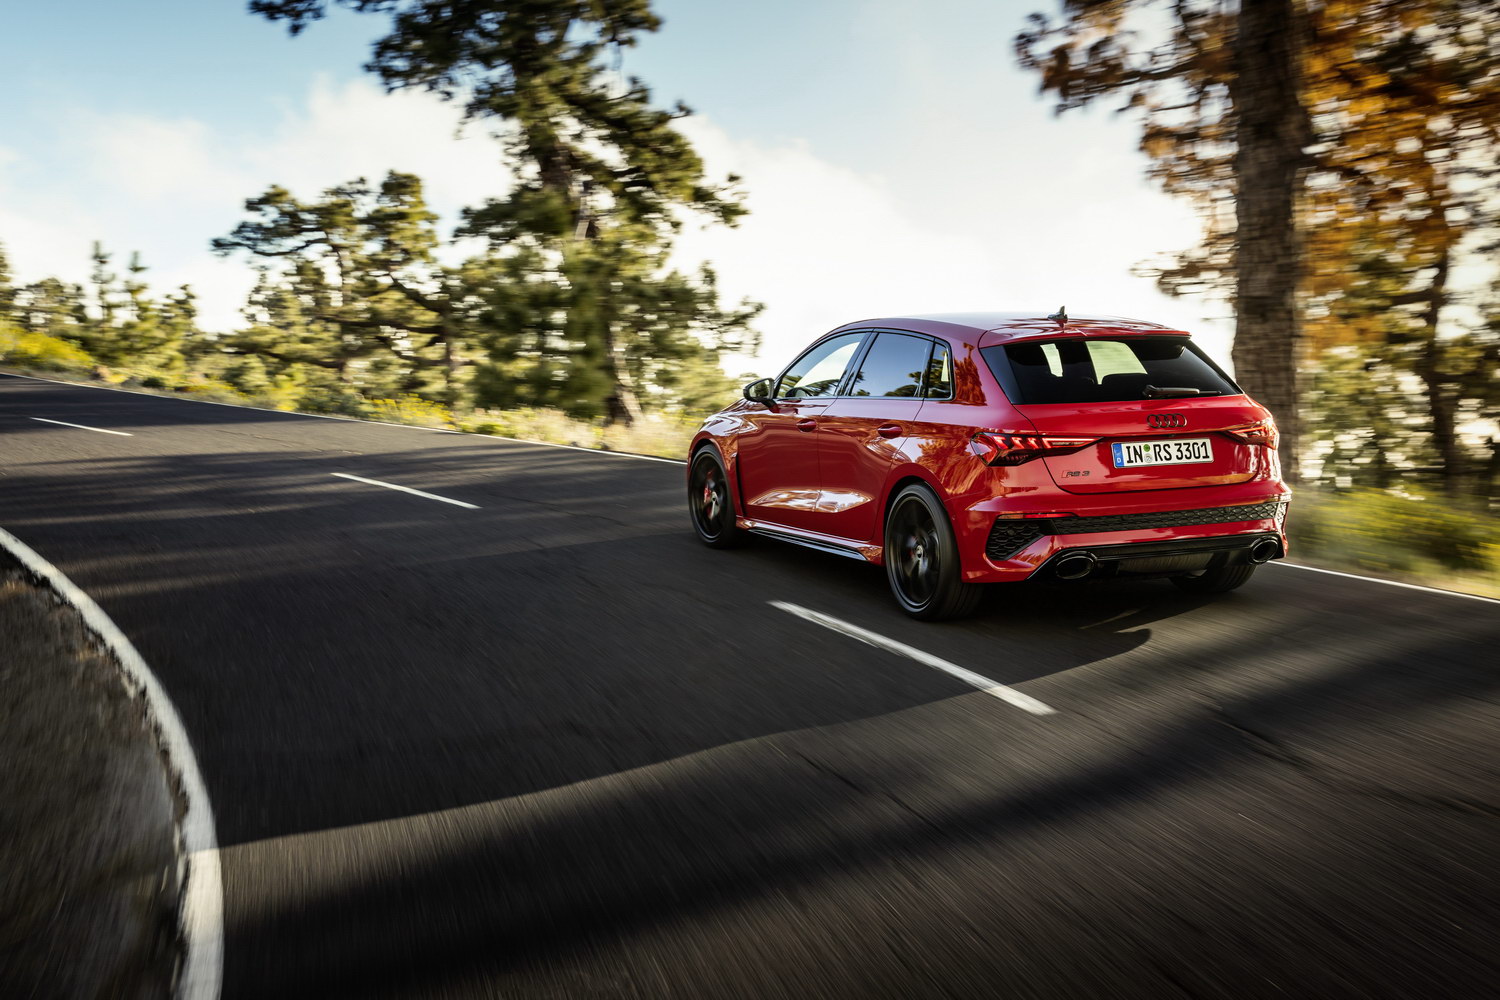 New Audi RS 3 twins revealed with 400hp